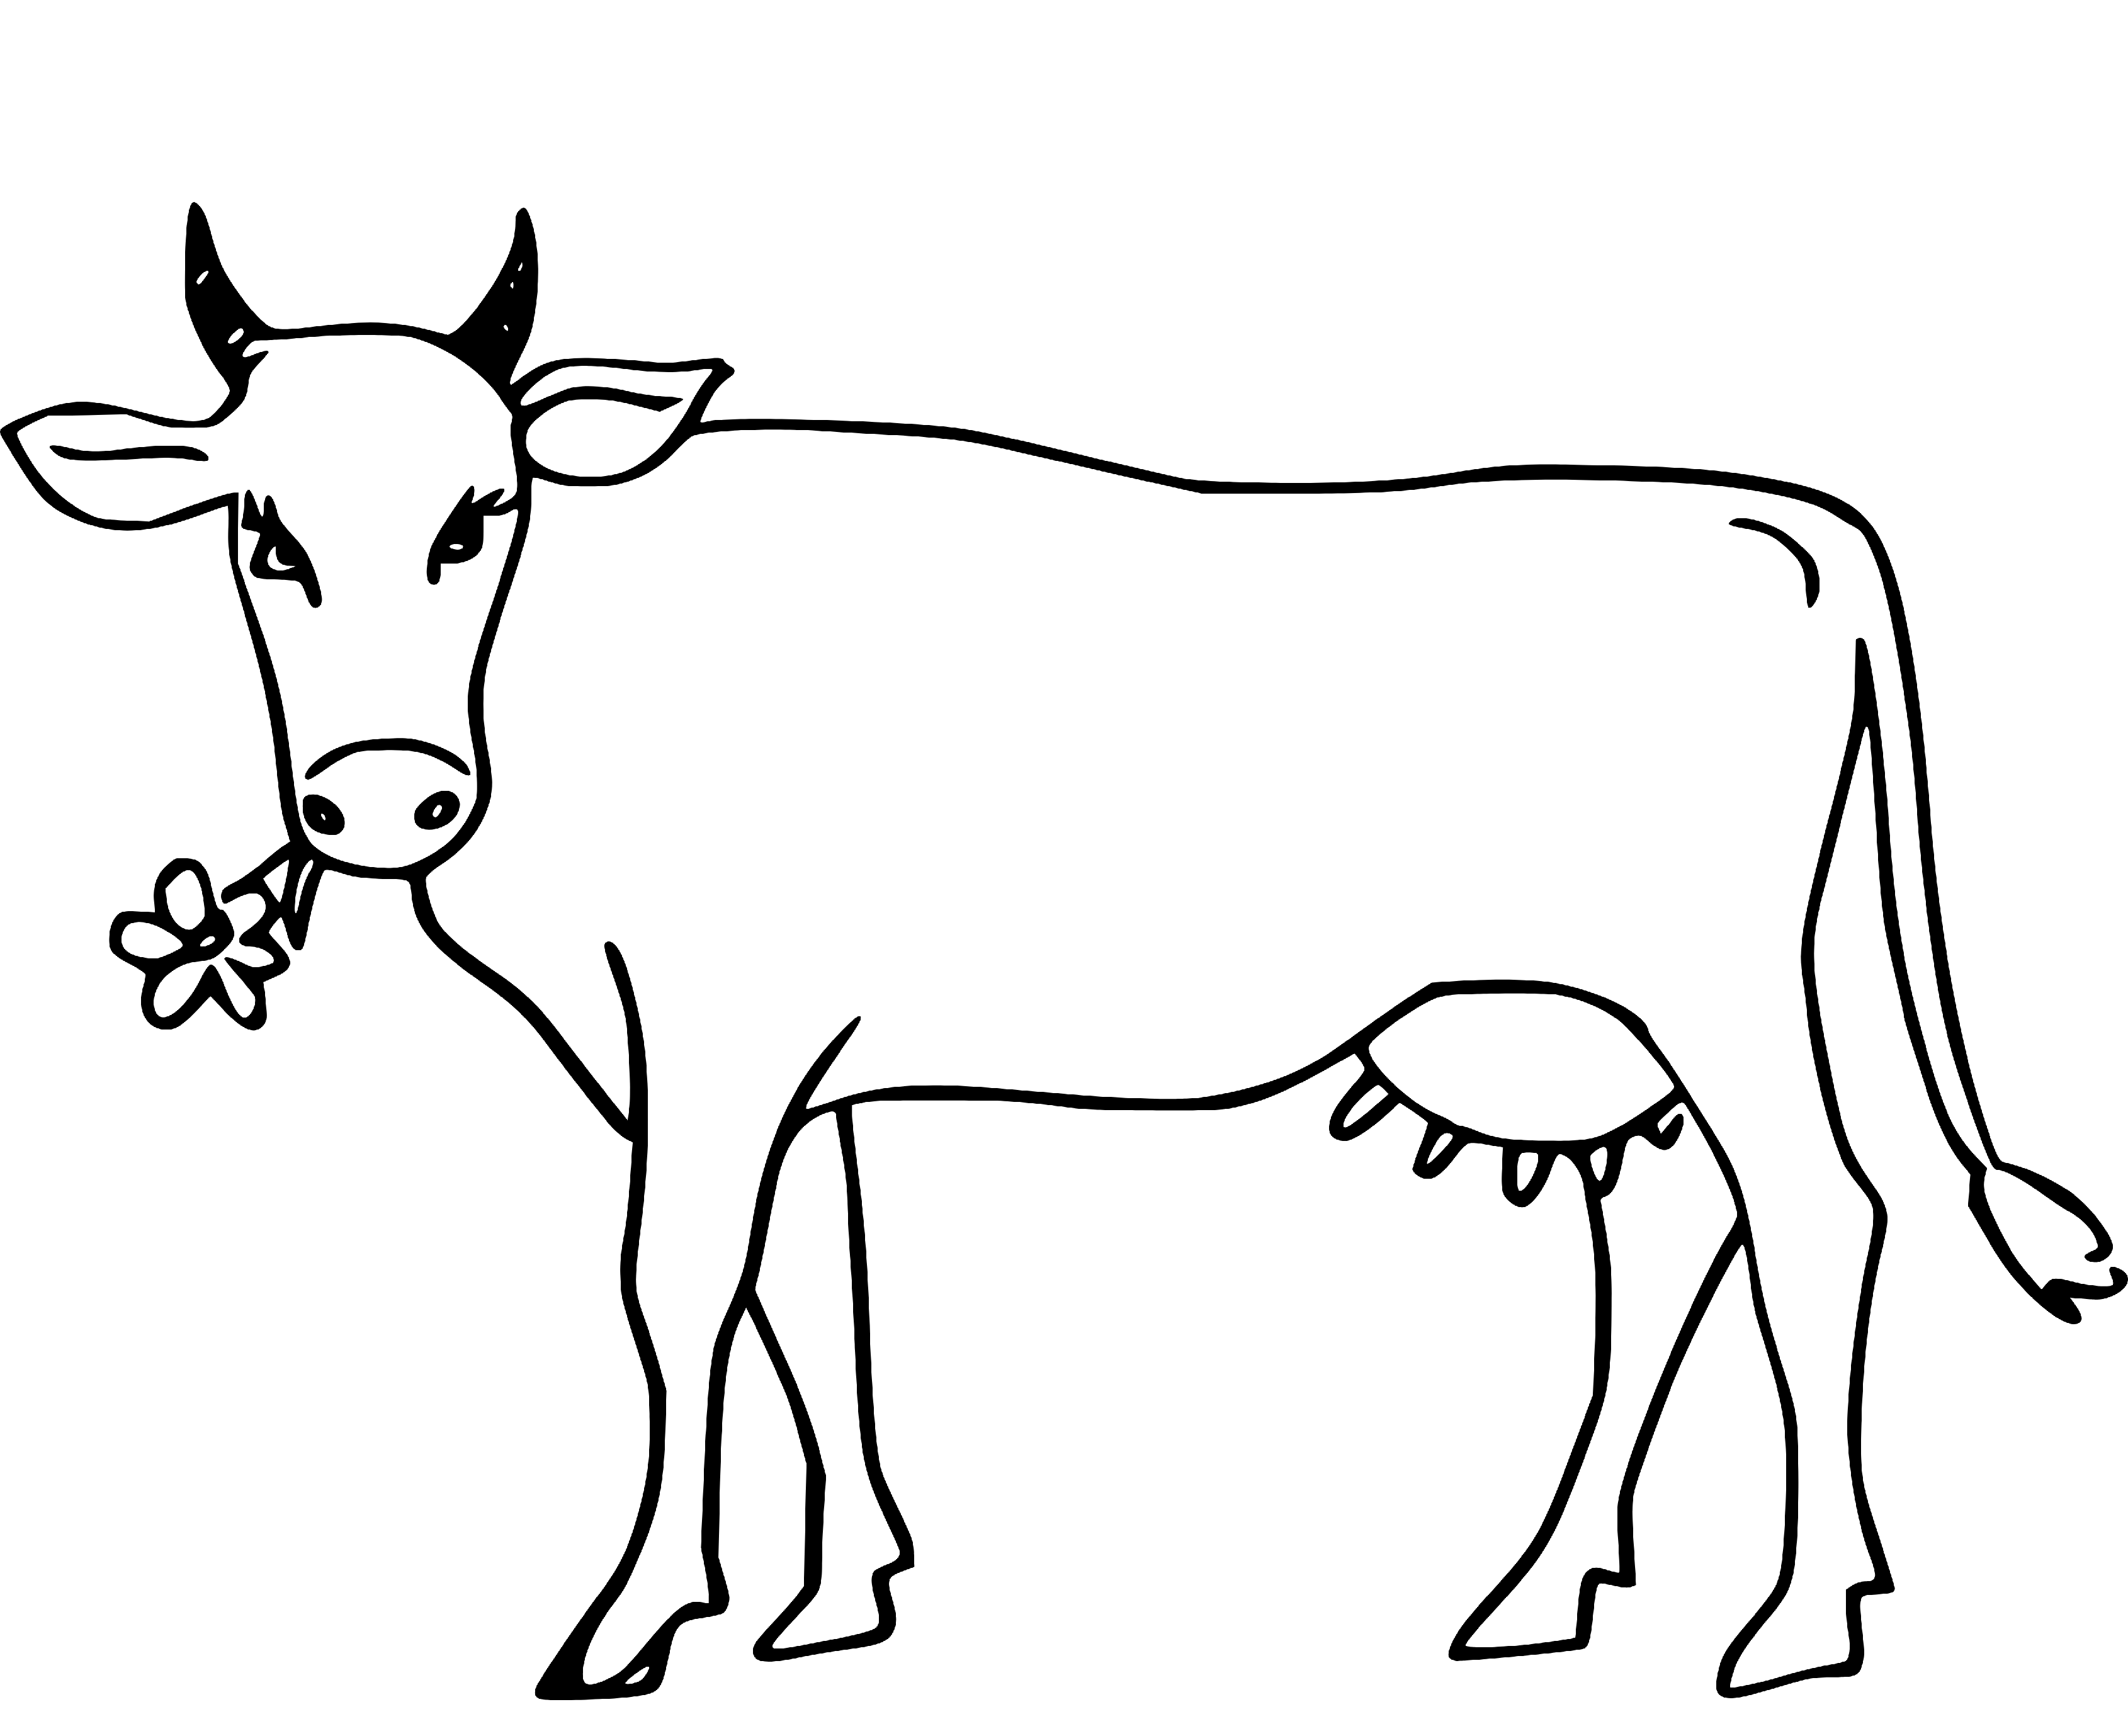 Printable Cow eating flower Coloring Page for kids.